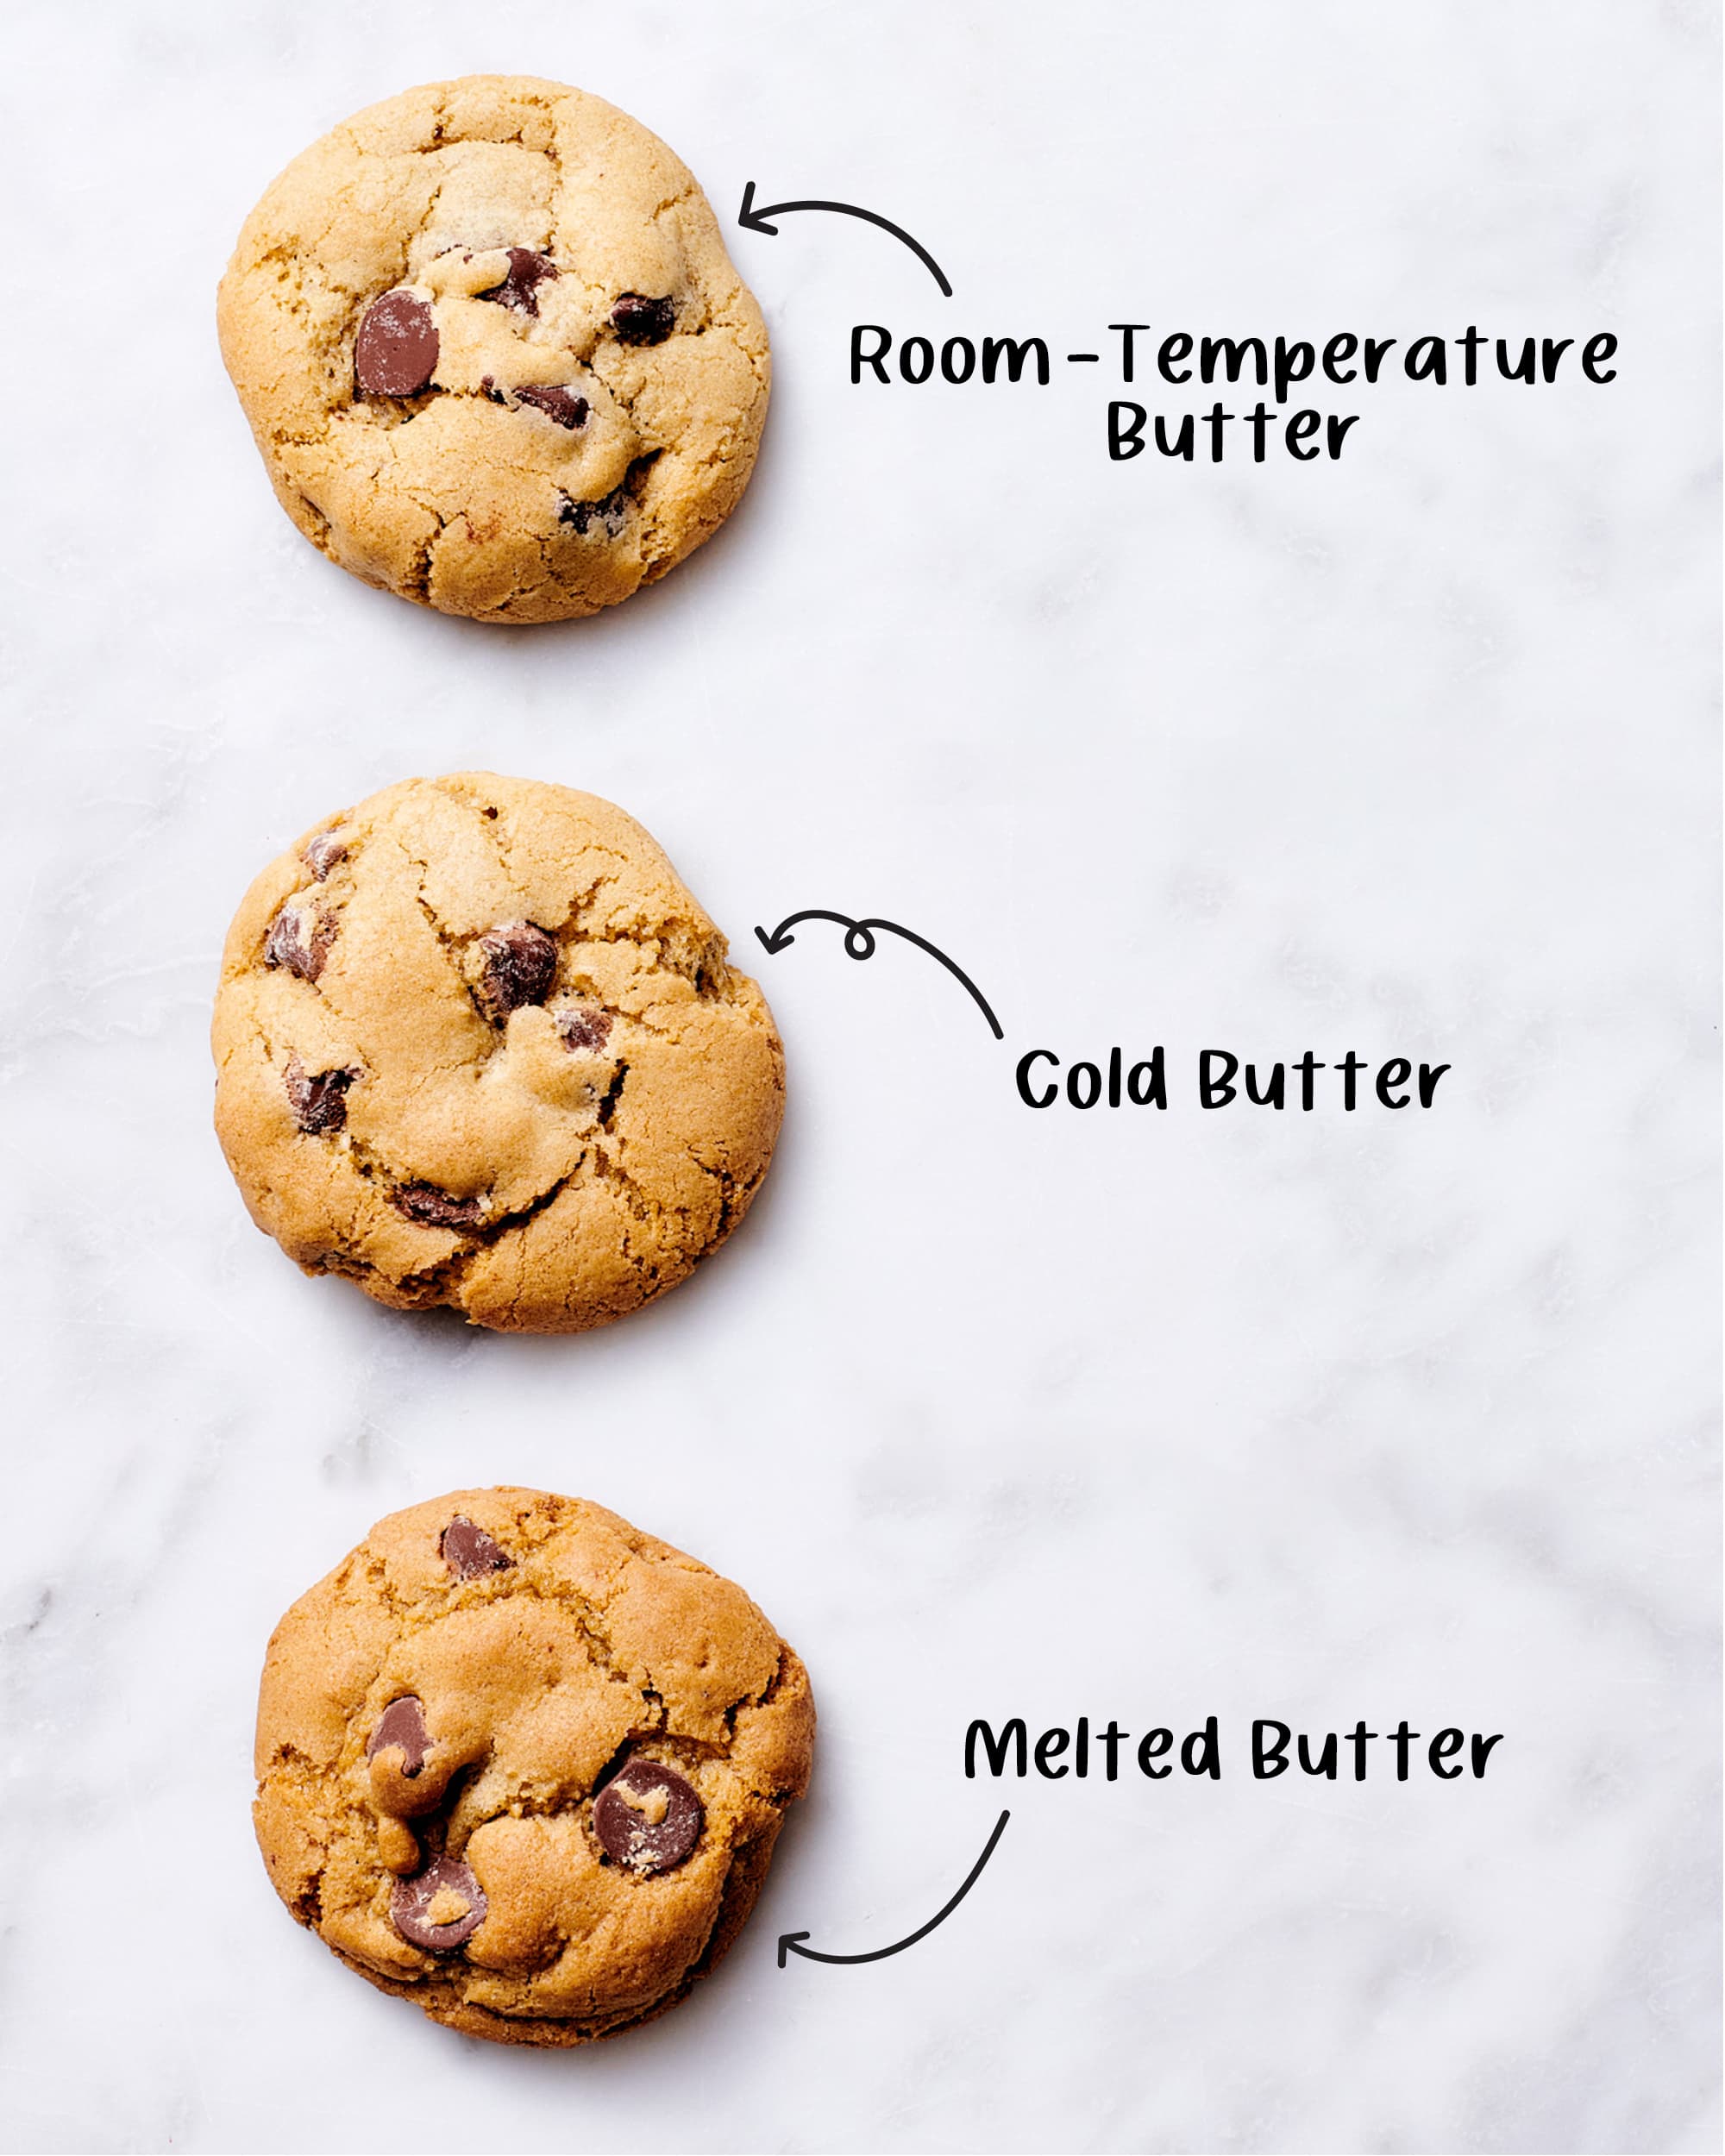 How Does Baking Powder Affect My Cookies?